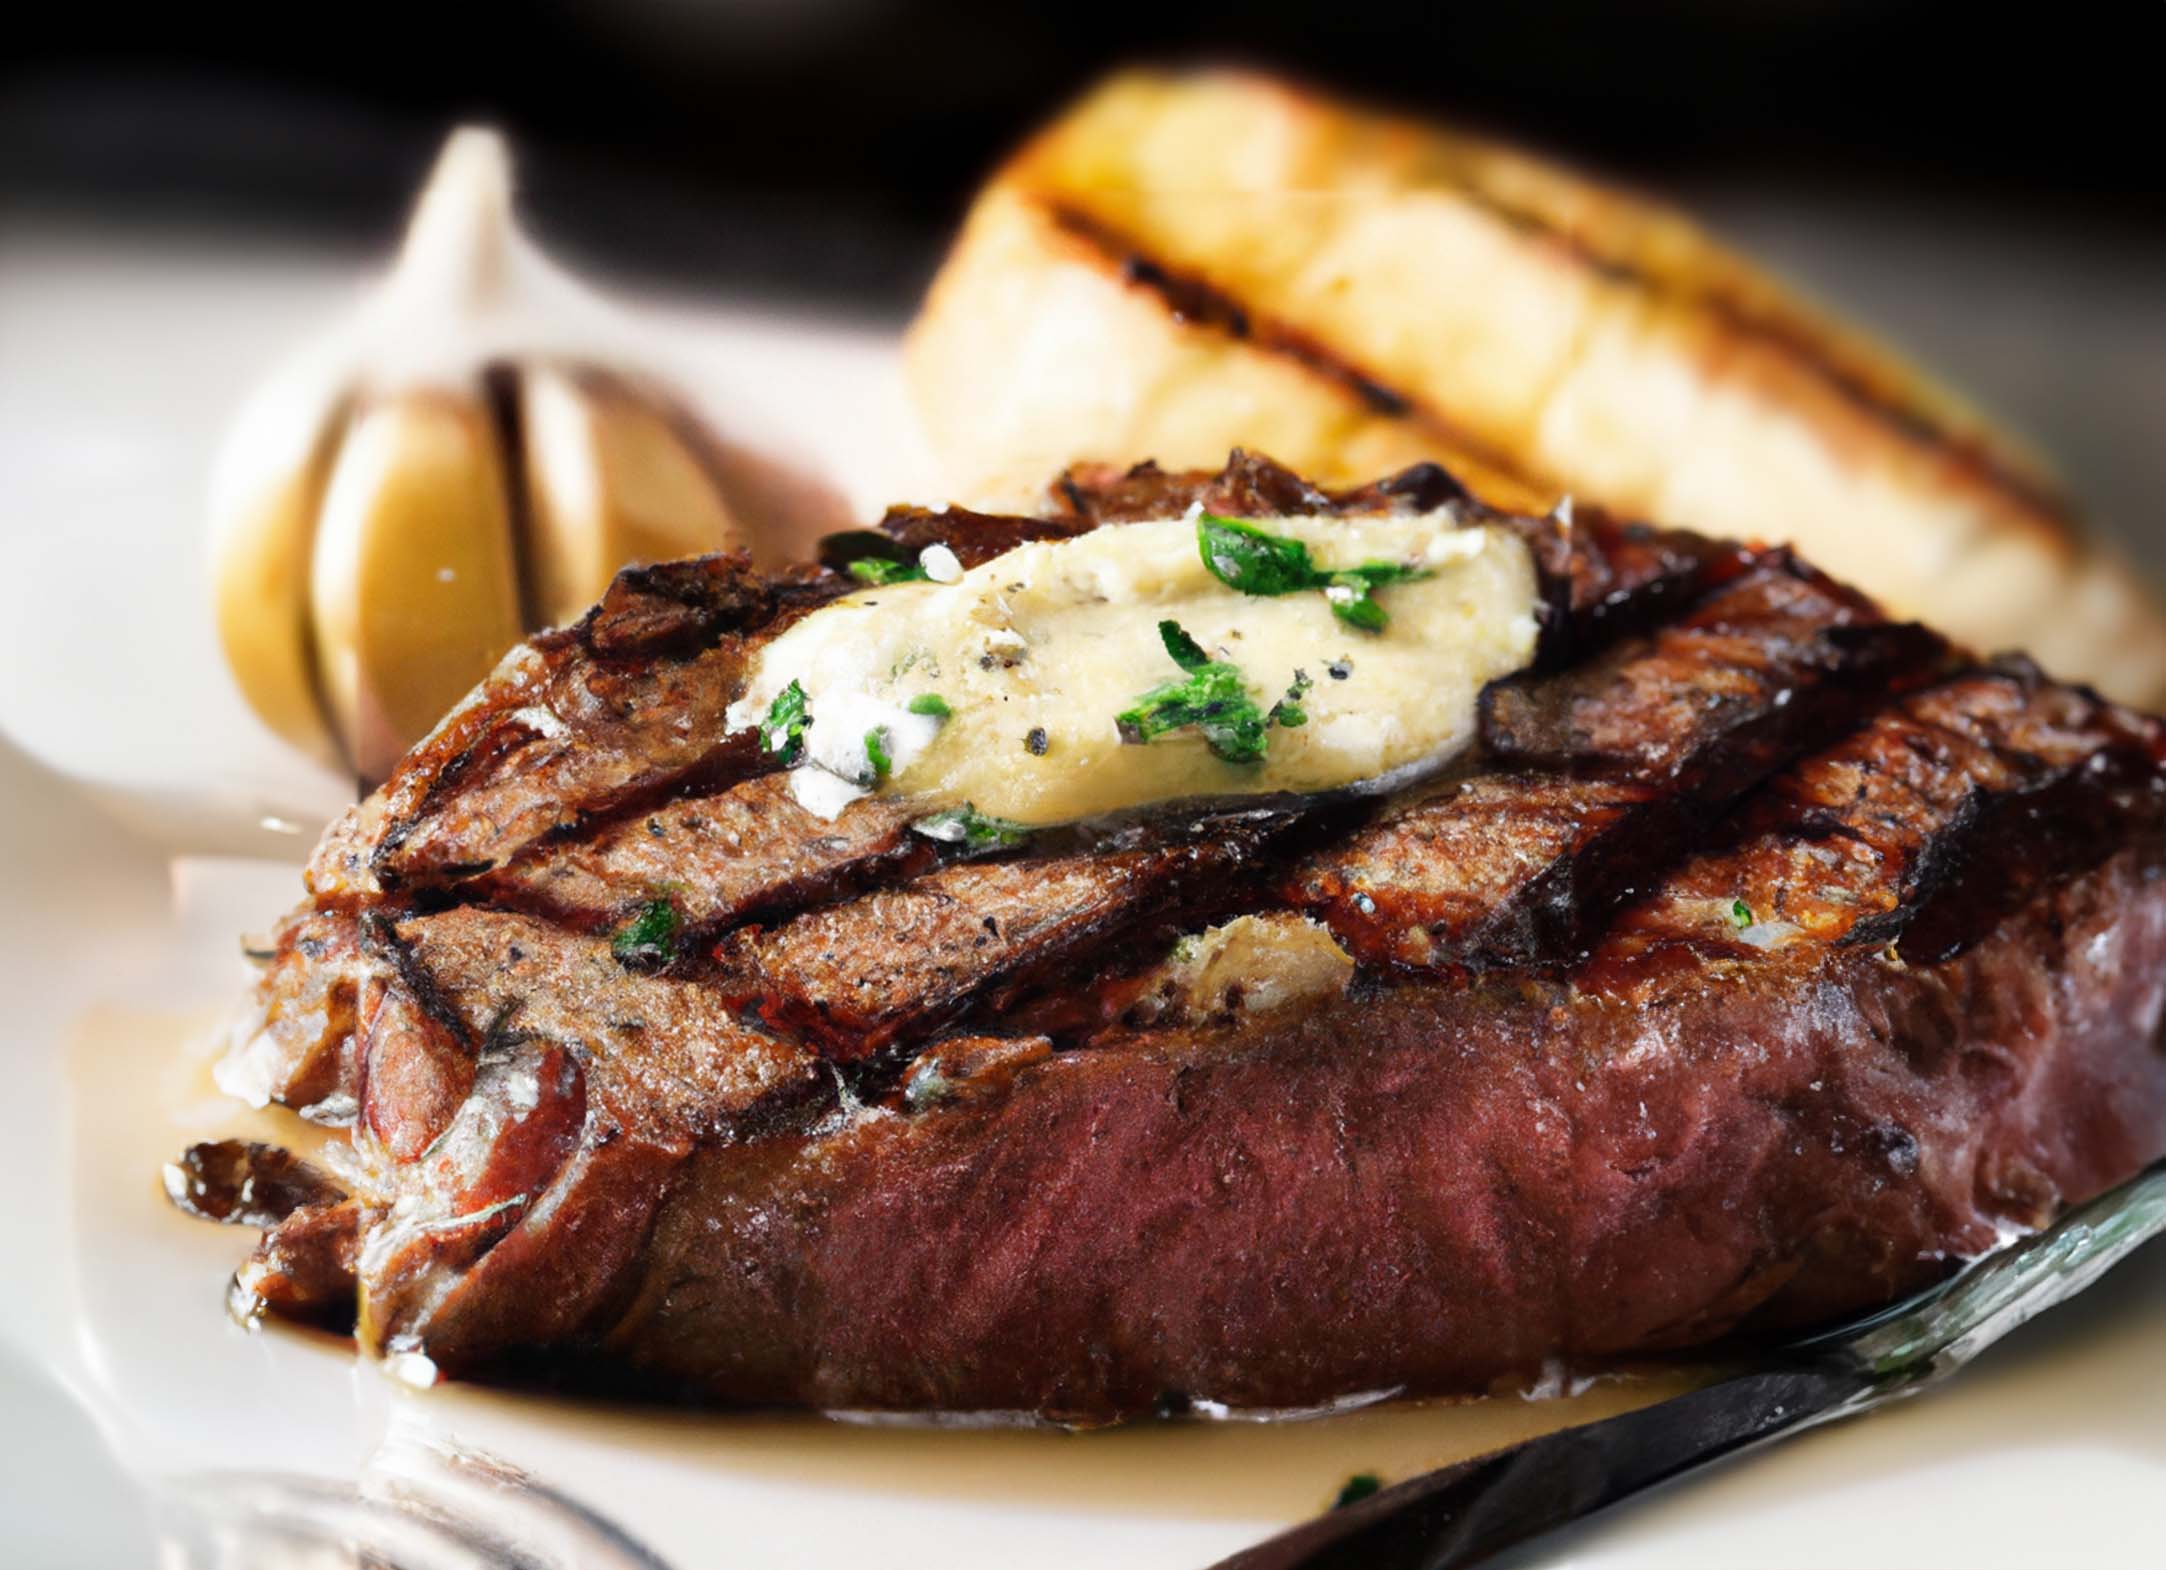 a beautifully seared steak with a golden crust, adorned with a pat of melting garlic butter.